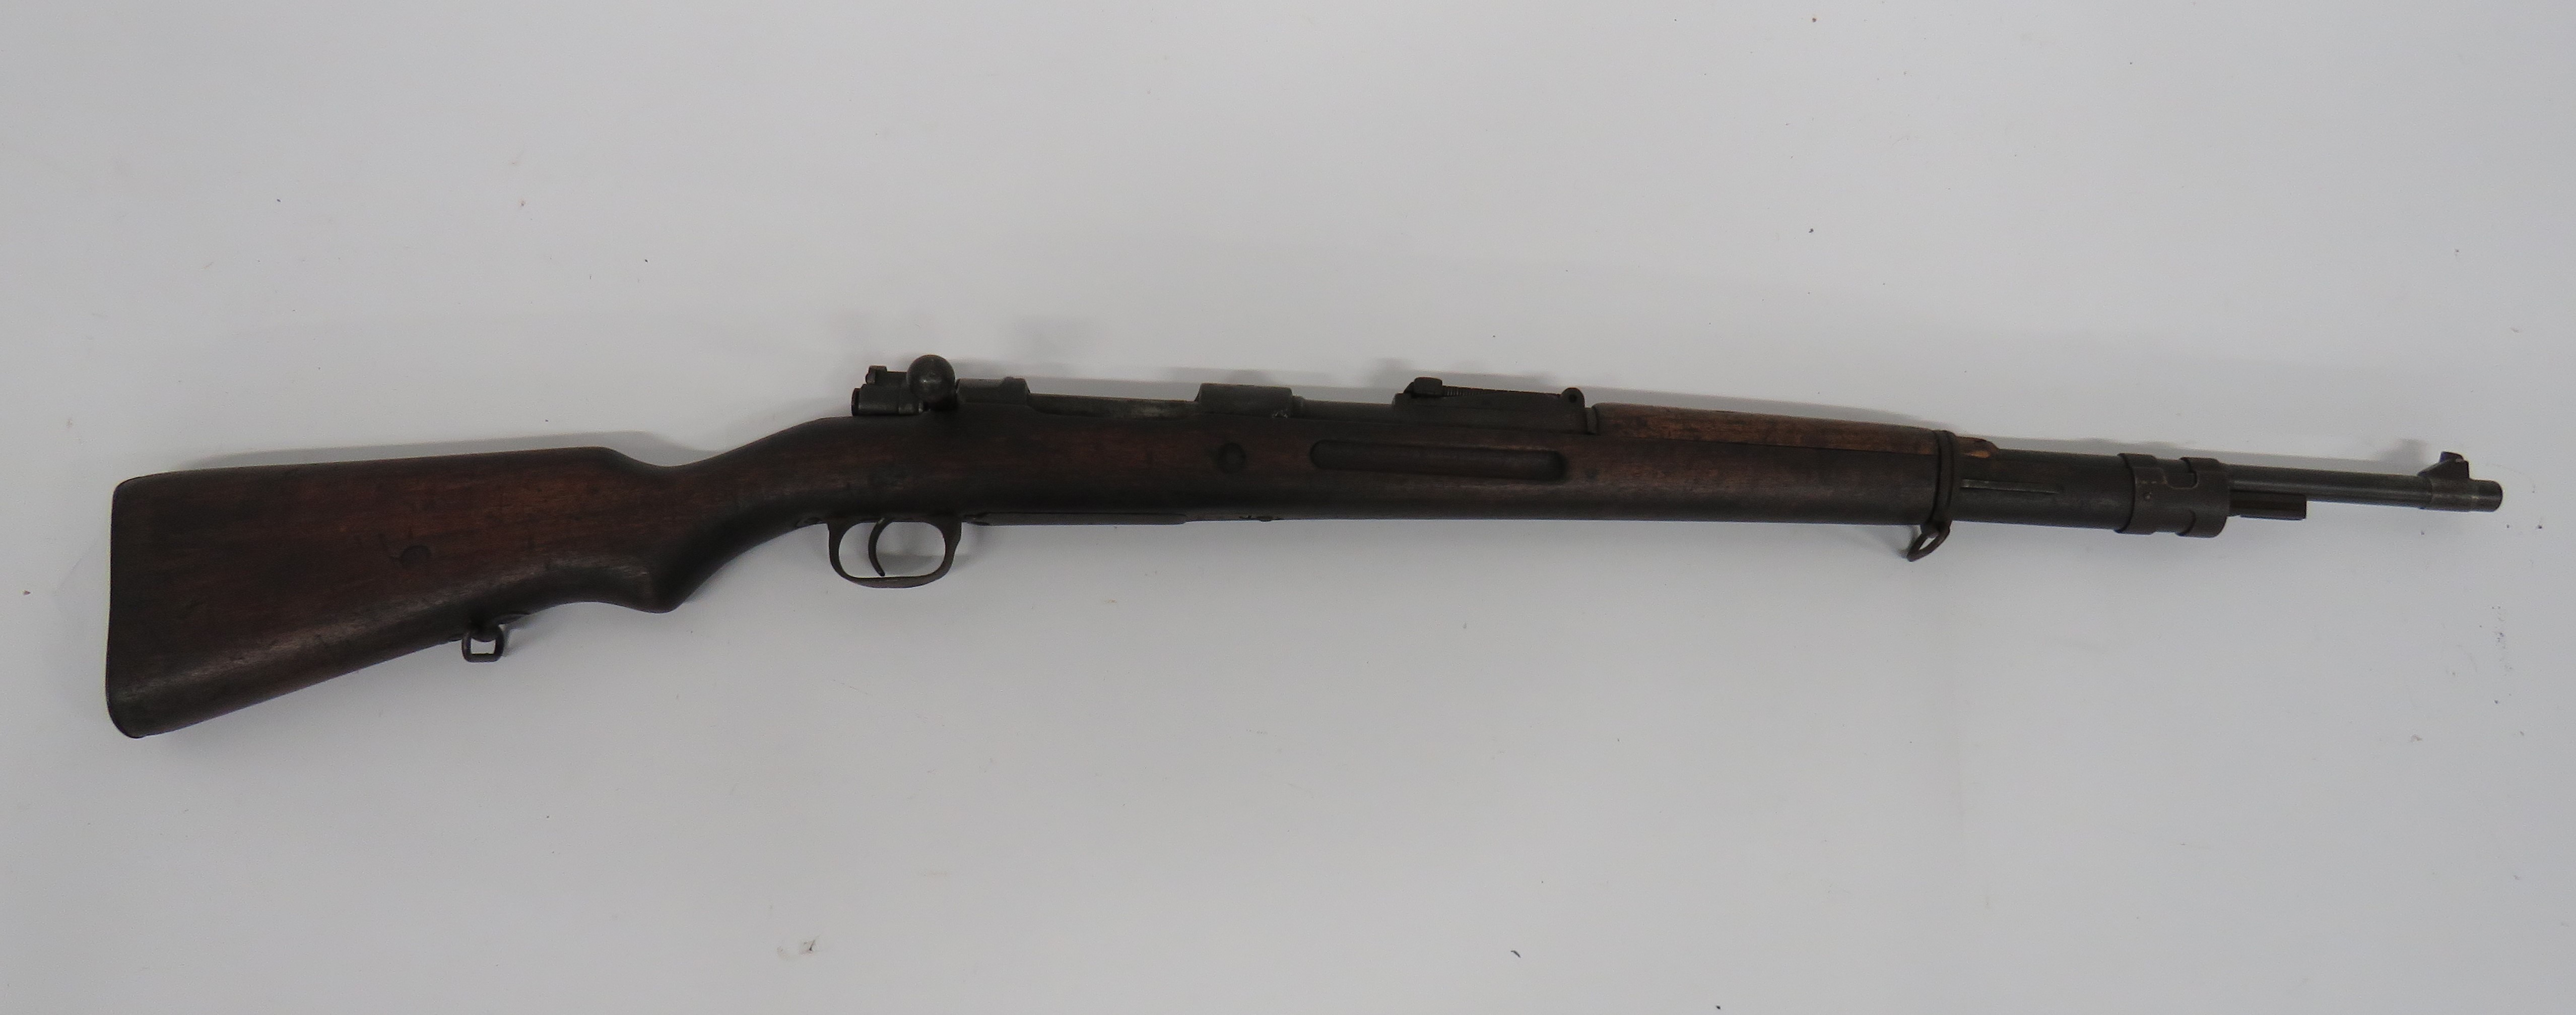 Deactivated Chinese Contract Mauser Rifle